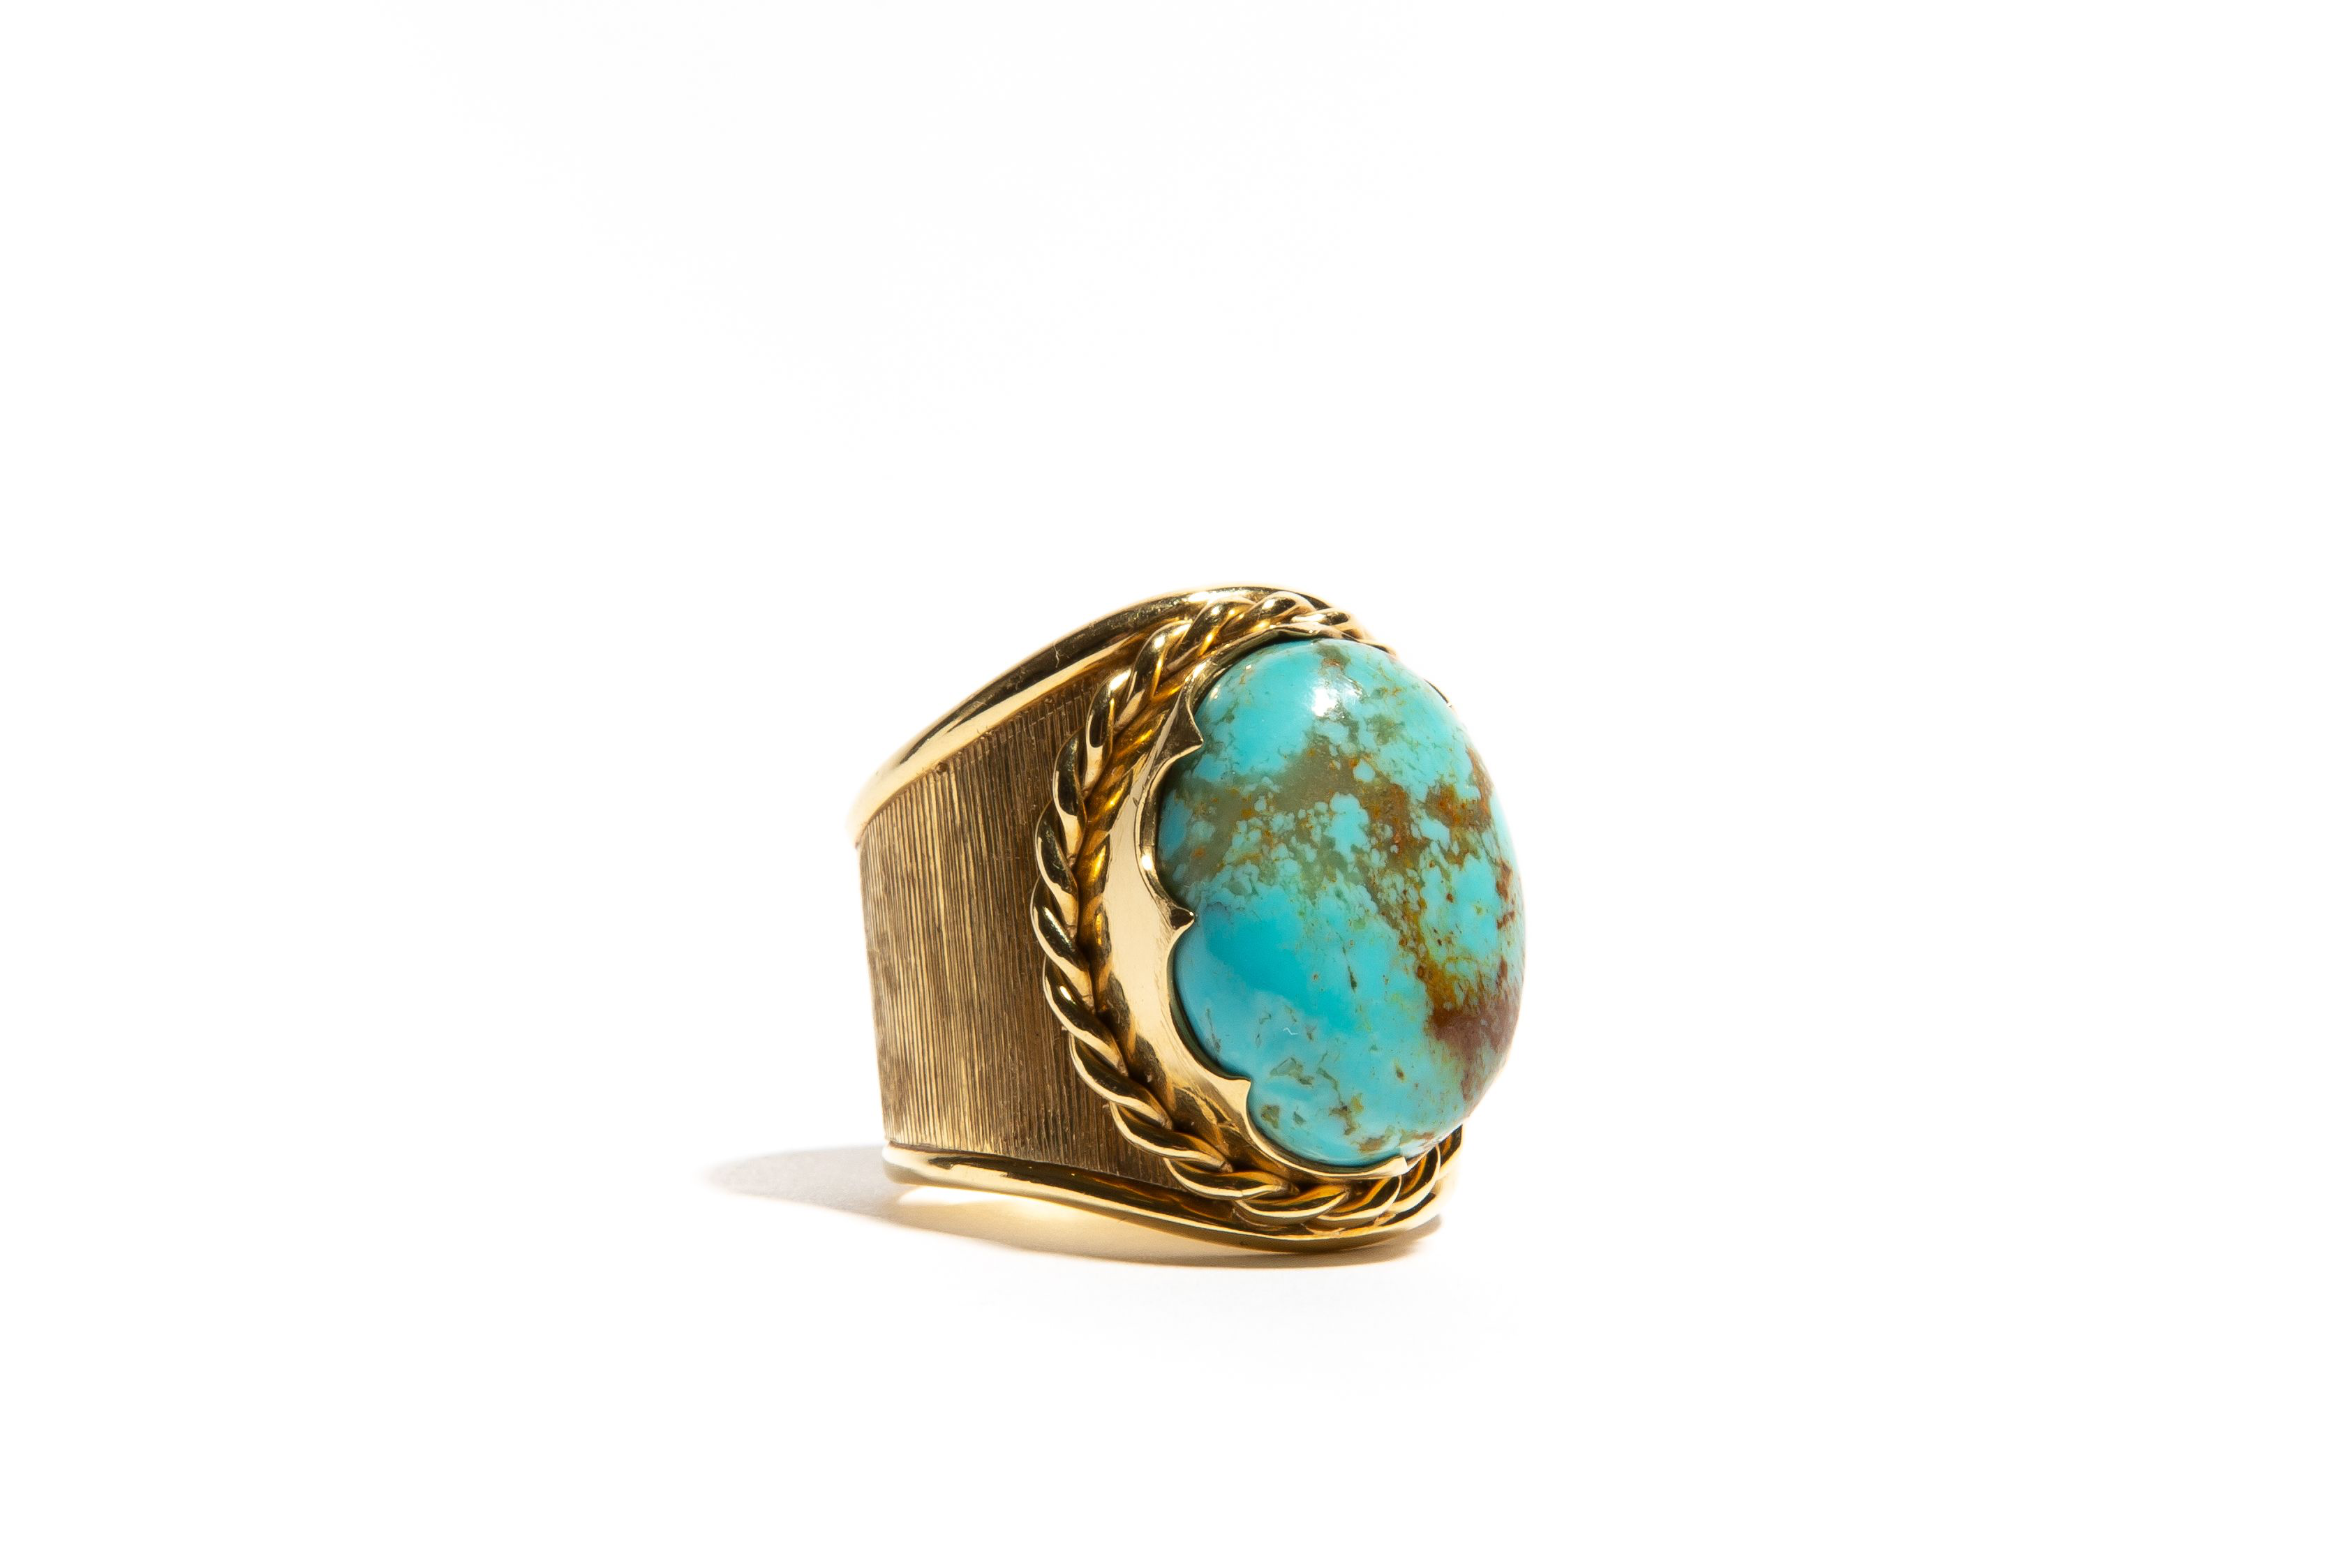 The Reeves & Phoenix - Gold and Turquoise Wedding Ring Set – Rustic and Main